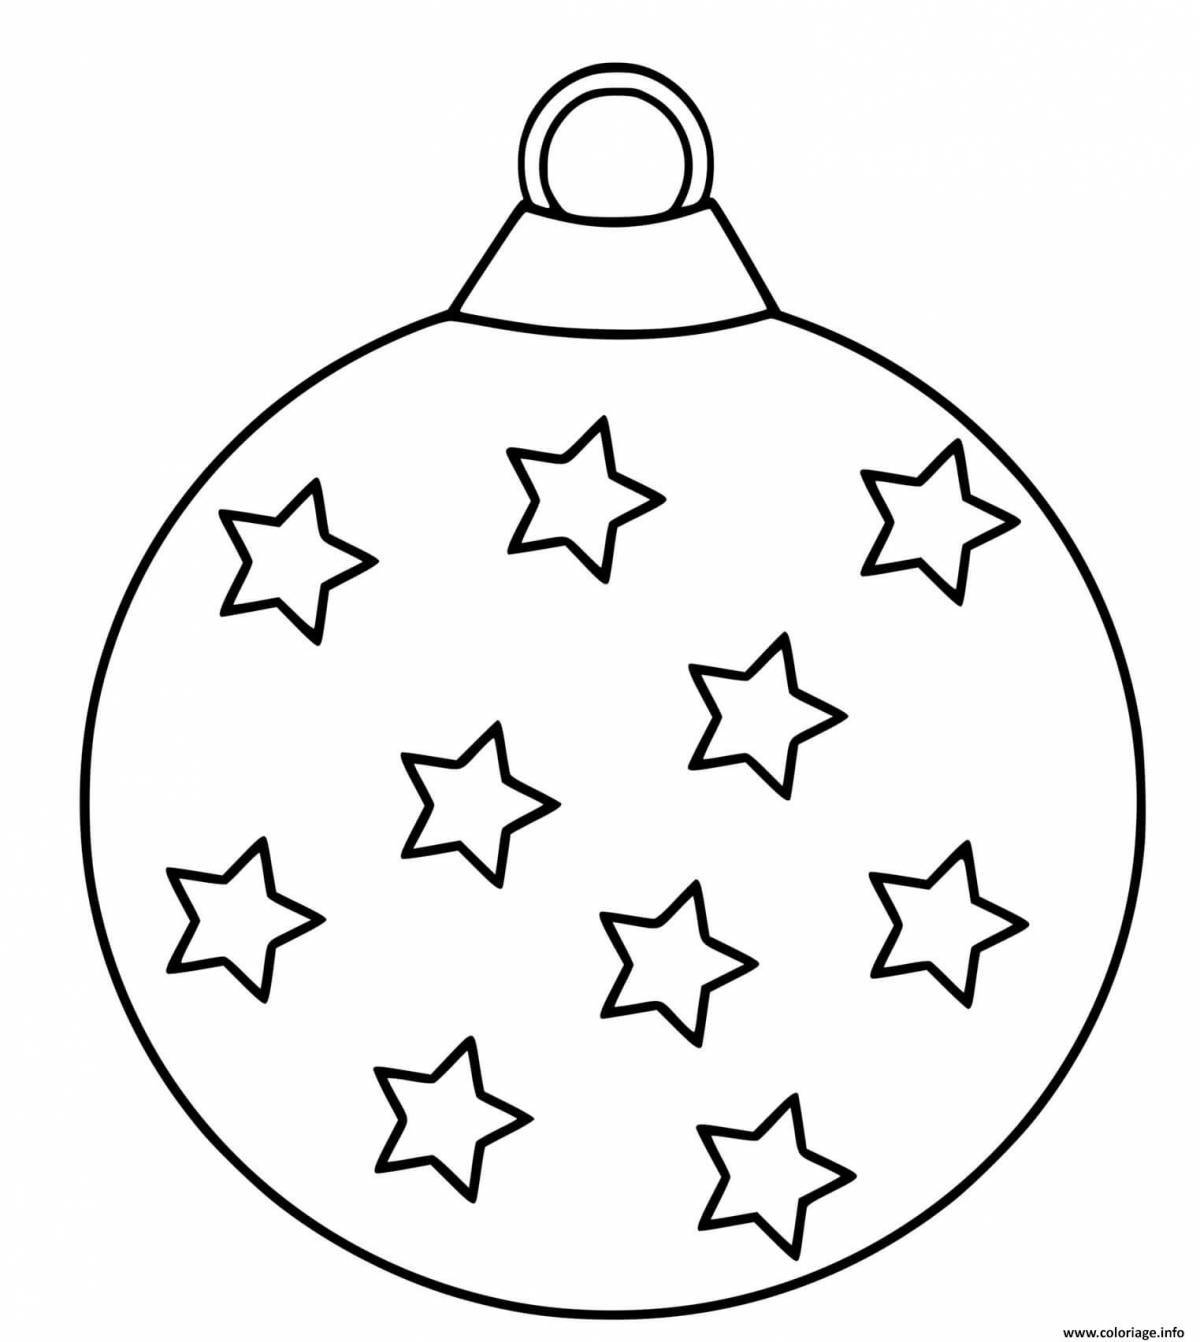 Fancy coloring christmas ball